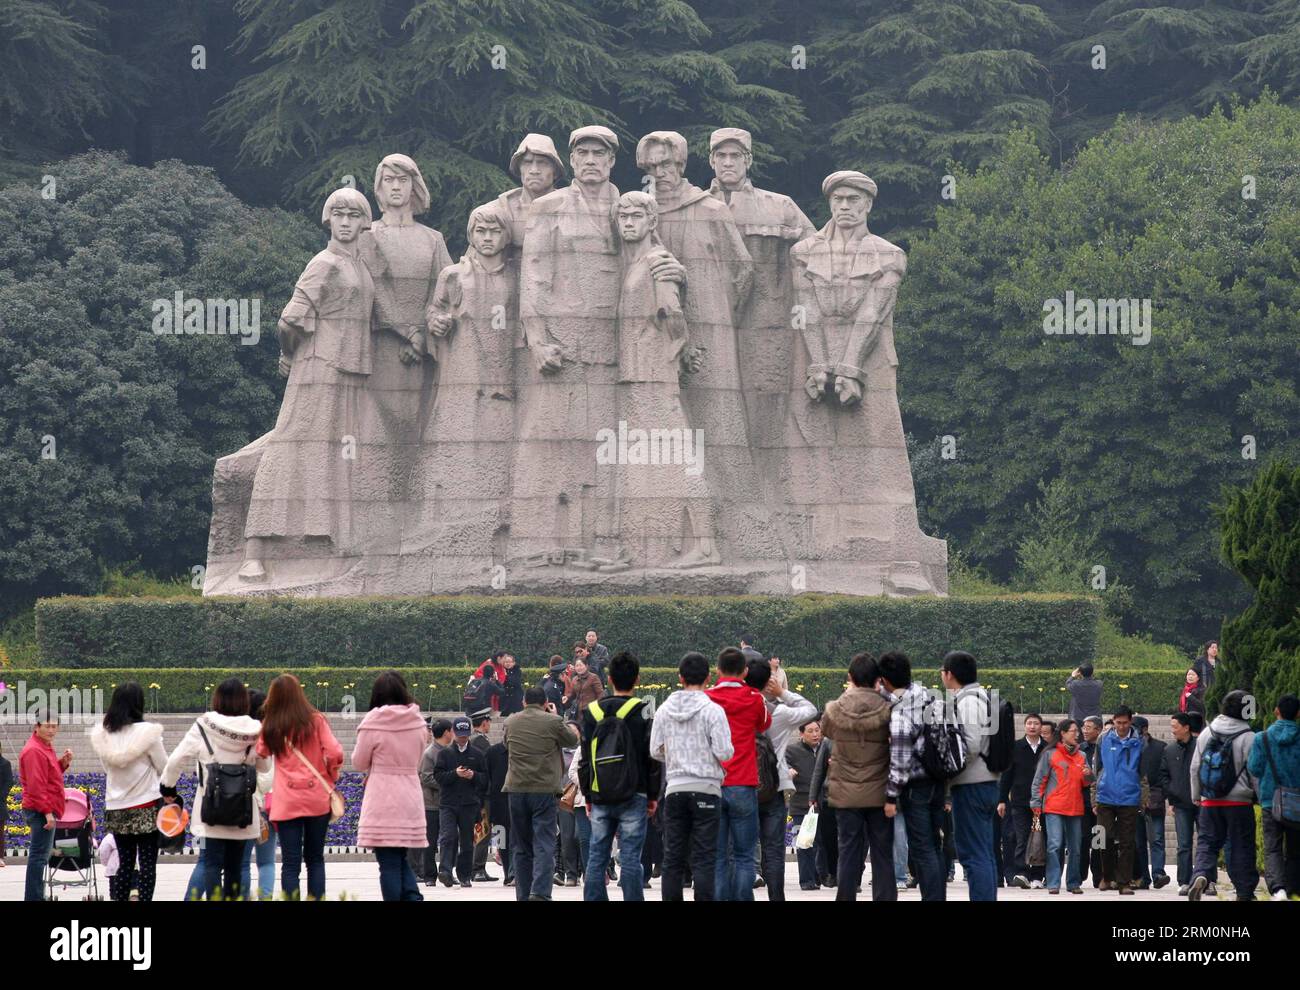 Bildnummer: 59460462  Datum: 30.03.2013  Copyright: imago/Xinhua Visitors pay respect to the statues of martyrs at Yuhuatai Martyr Cemetery in Nanjing, capital of east China s Jiangsu Province, March 30, 2013. Various memorial ceremonies were held across the country to pay respect to martyrs ahead of the Qingming Festival, or Tomb Sweeping Day, which falls on April 4 this year. (Xinhua) (ry) CHINA-QINGMING FESTIVAL-MEMORIAL CEREMONIES (CN) PUBLICATIONxNOTxINxCHN Gesellschaft xas x2x 2013 quer premiumd o0 Friedhof Trauer Gedenken  Totenfest Totengedenken Skulptur     59460462 Date 30 03 2013 Co Stock Photo